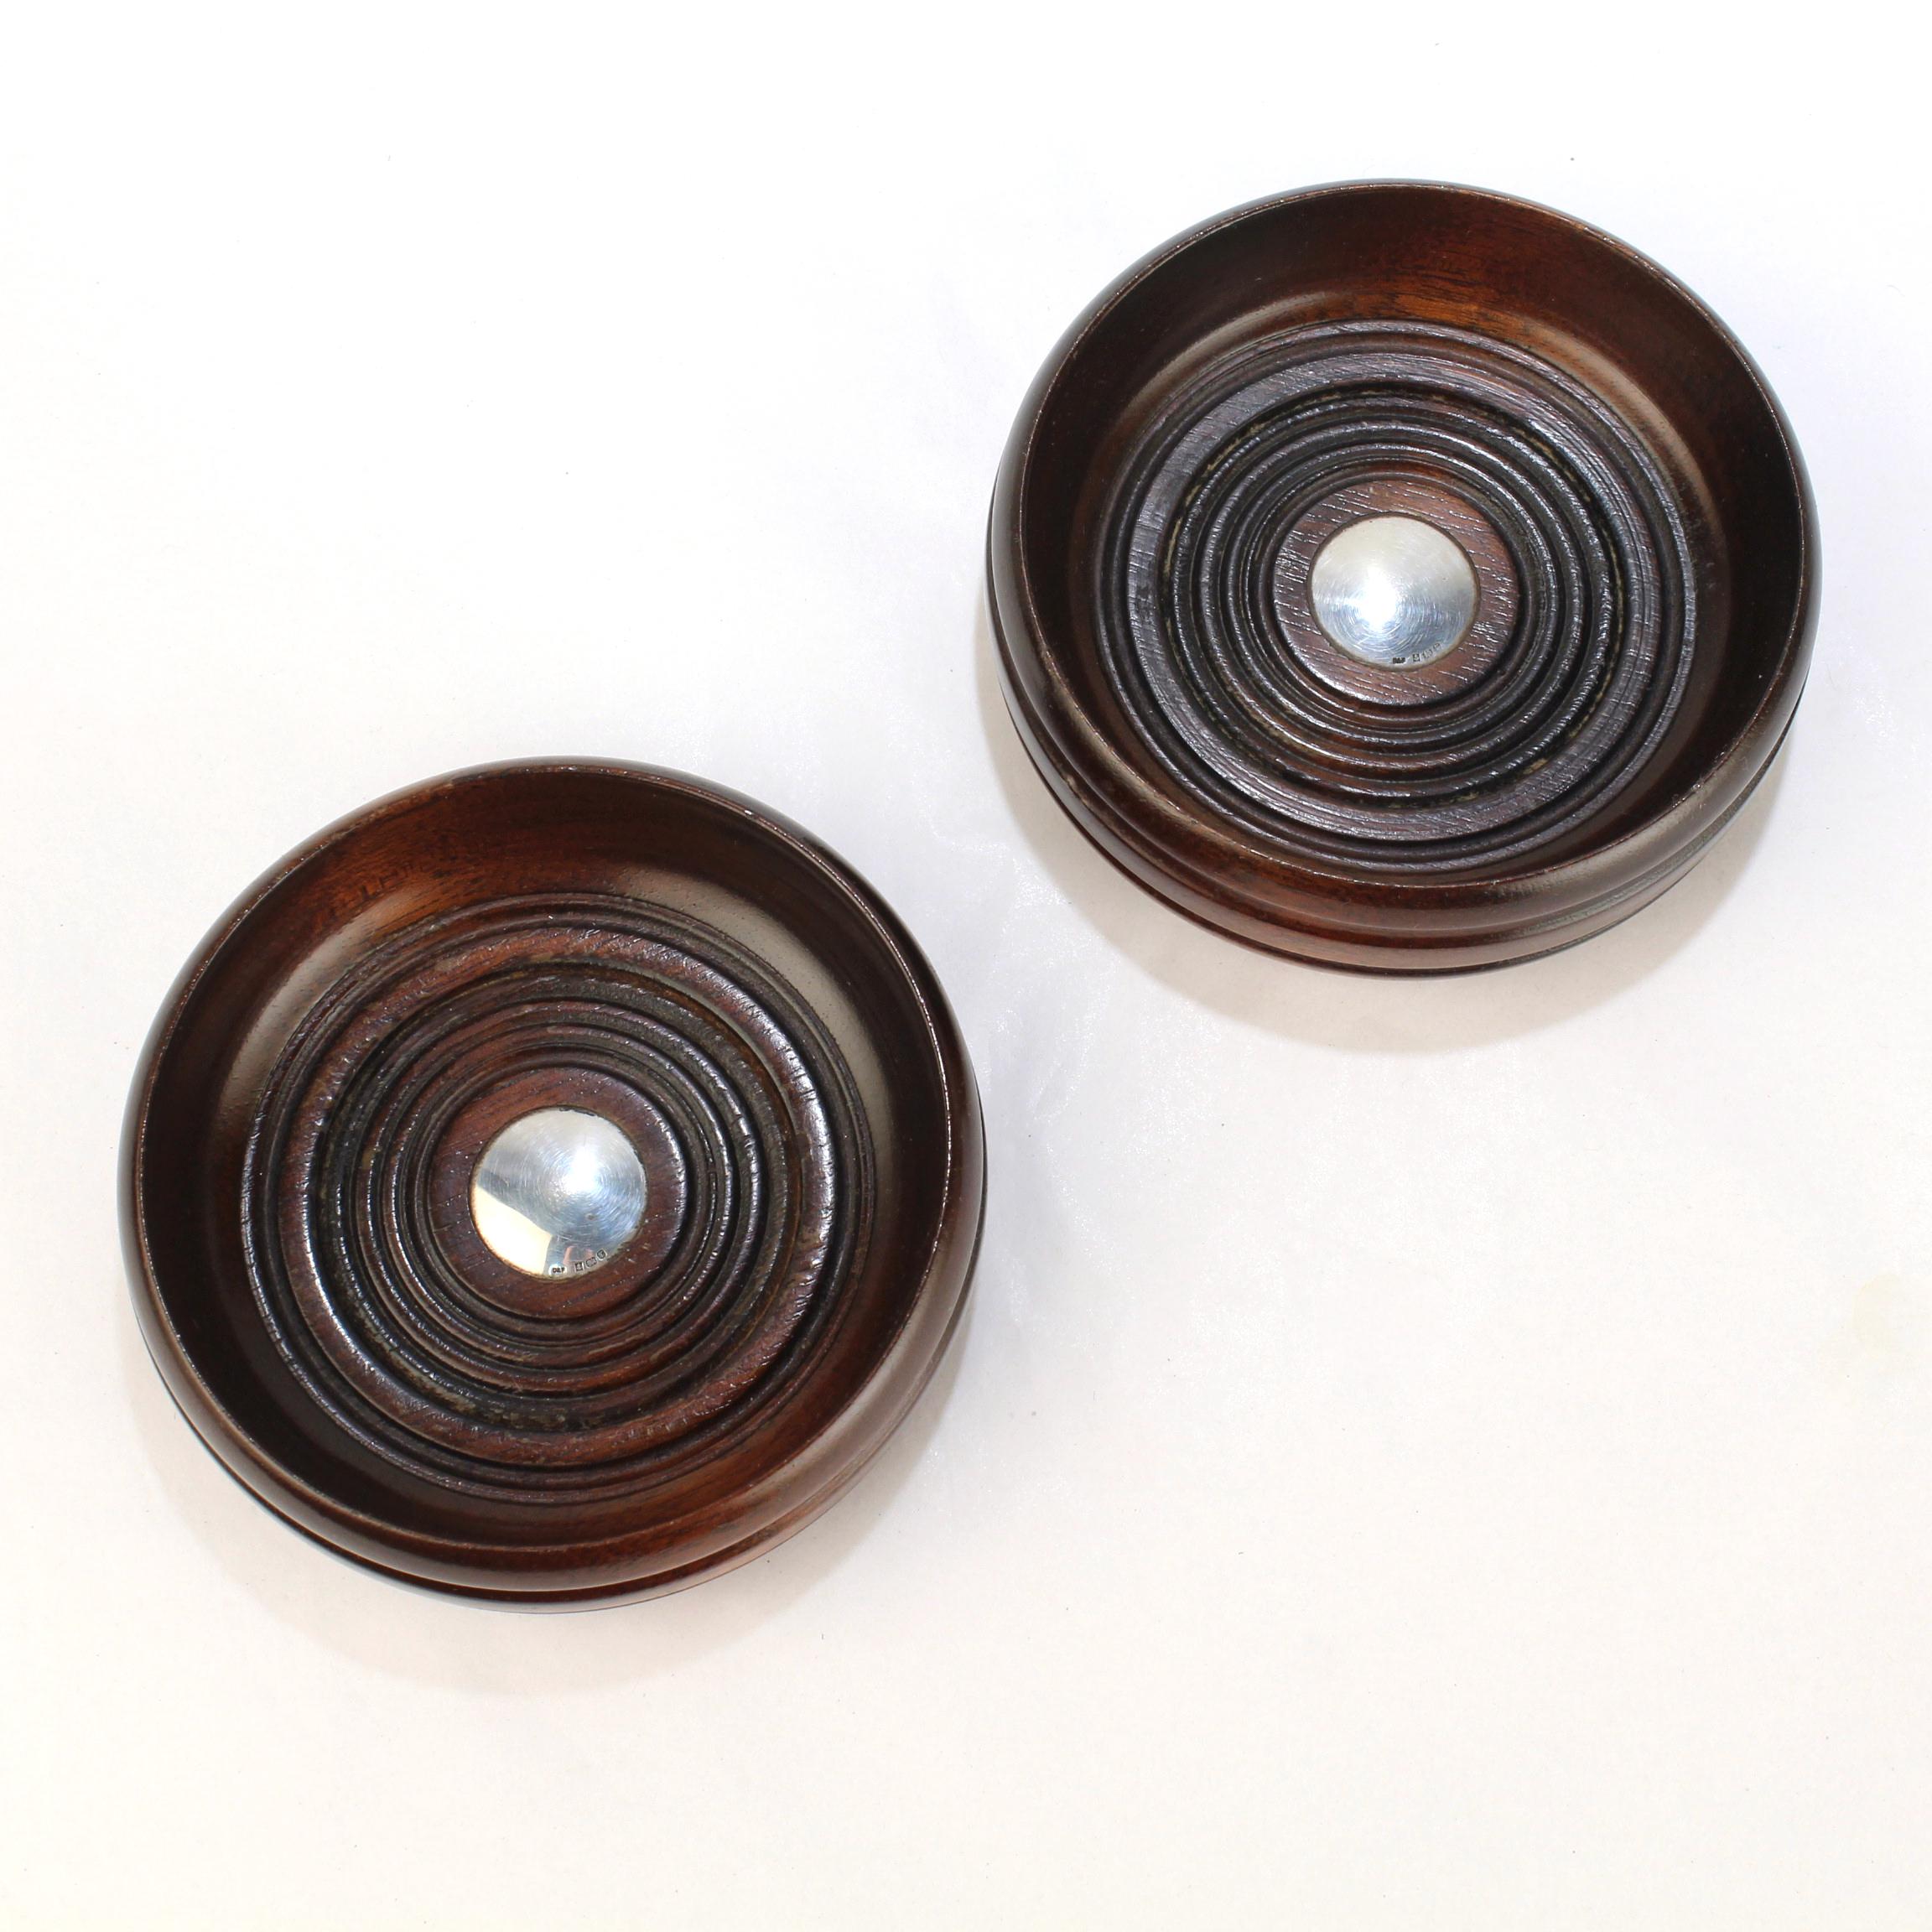 Edwardian Pair of Deakin & Francis Turned Mahogany and Sterling Silver Wine Coasters